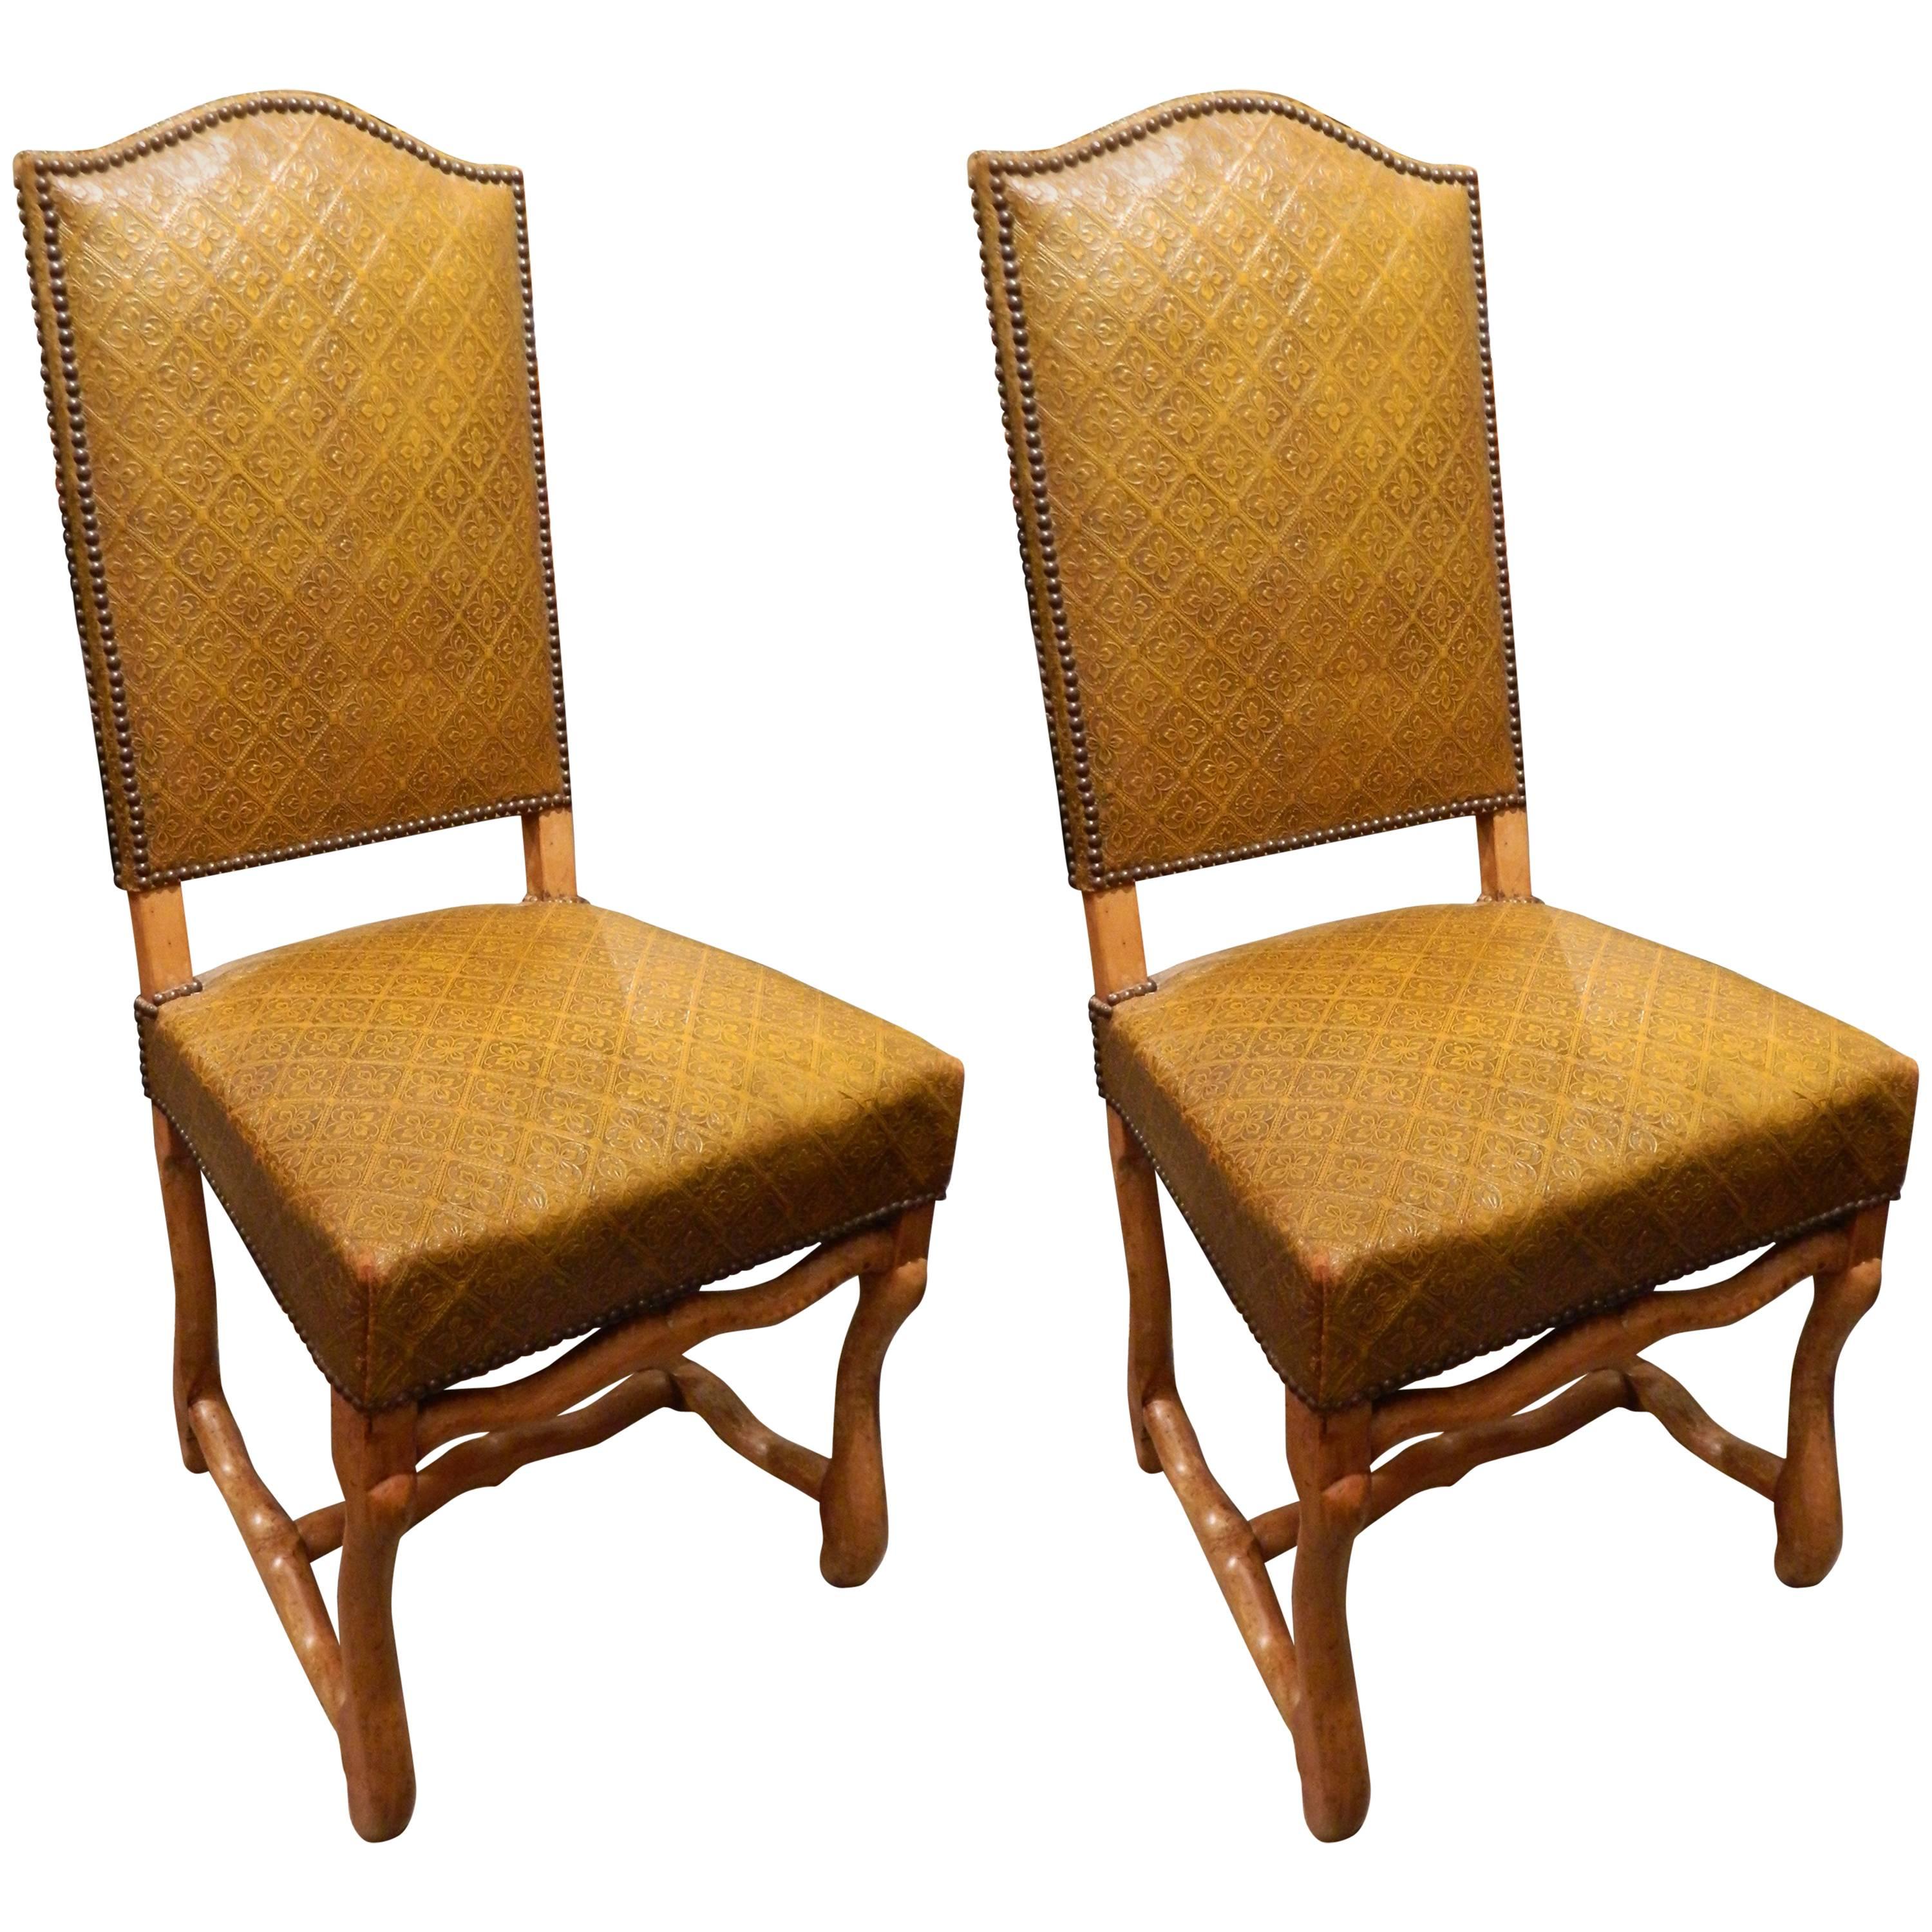 Pair of French Side Chairs Upholstered in Embossed Leather, Late 19th Century